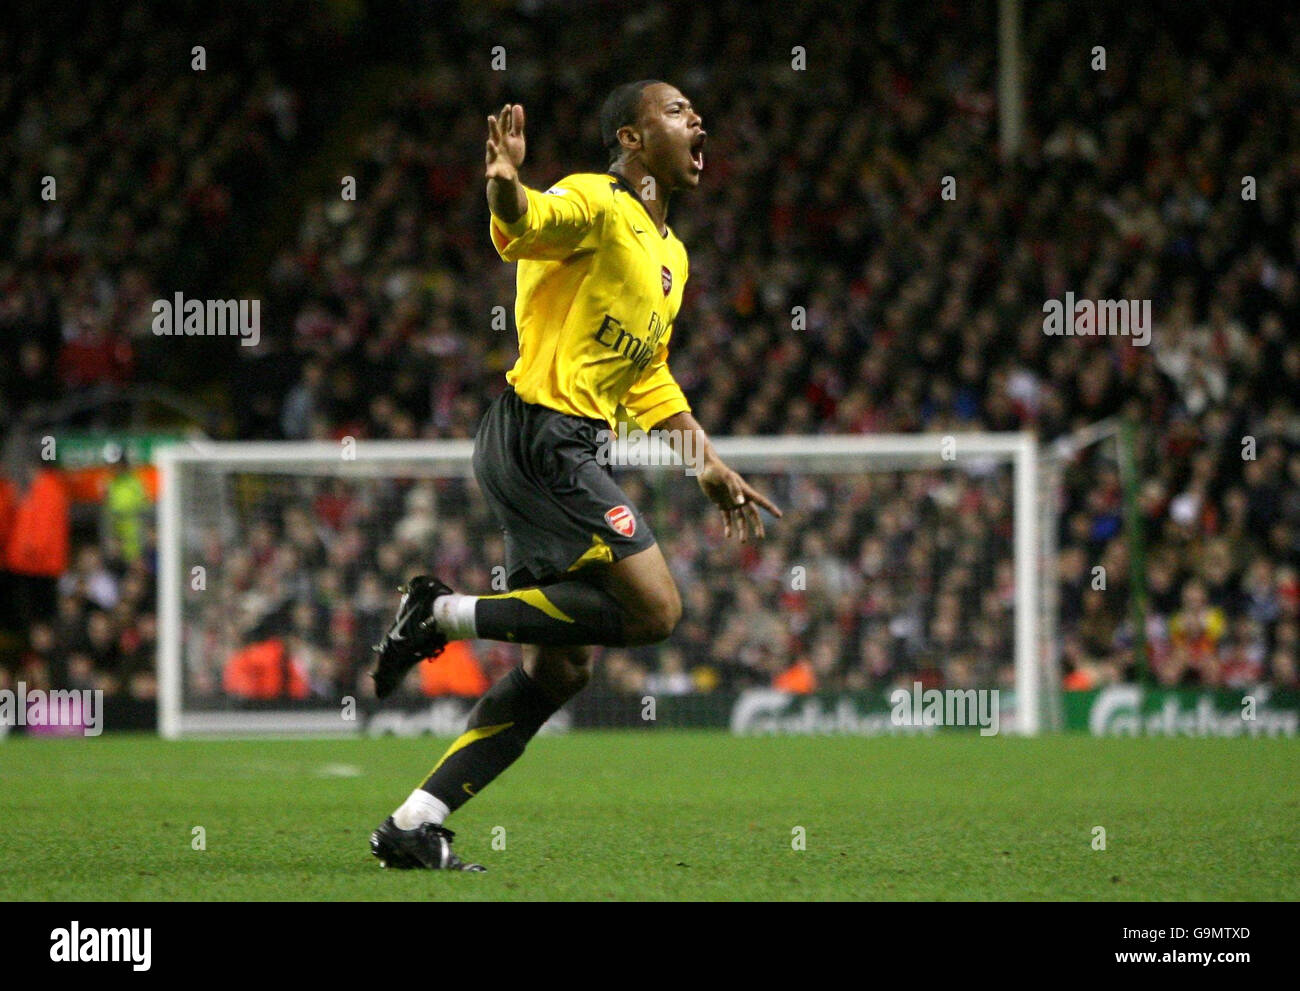 Arsenals Julio Baptista celebrates scoring his first goal during the Carling Cup Quarter Final match at Anfield, Liverpool. Stock Photo